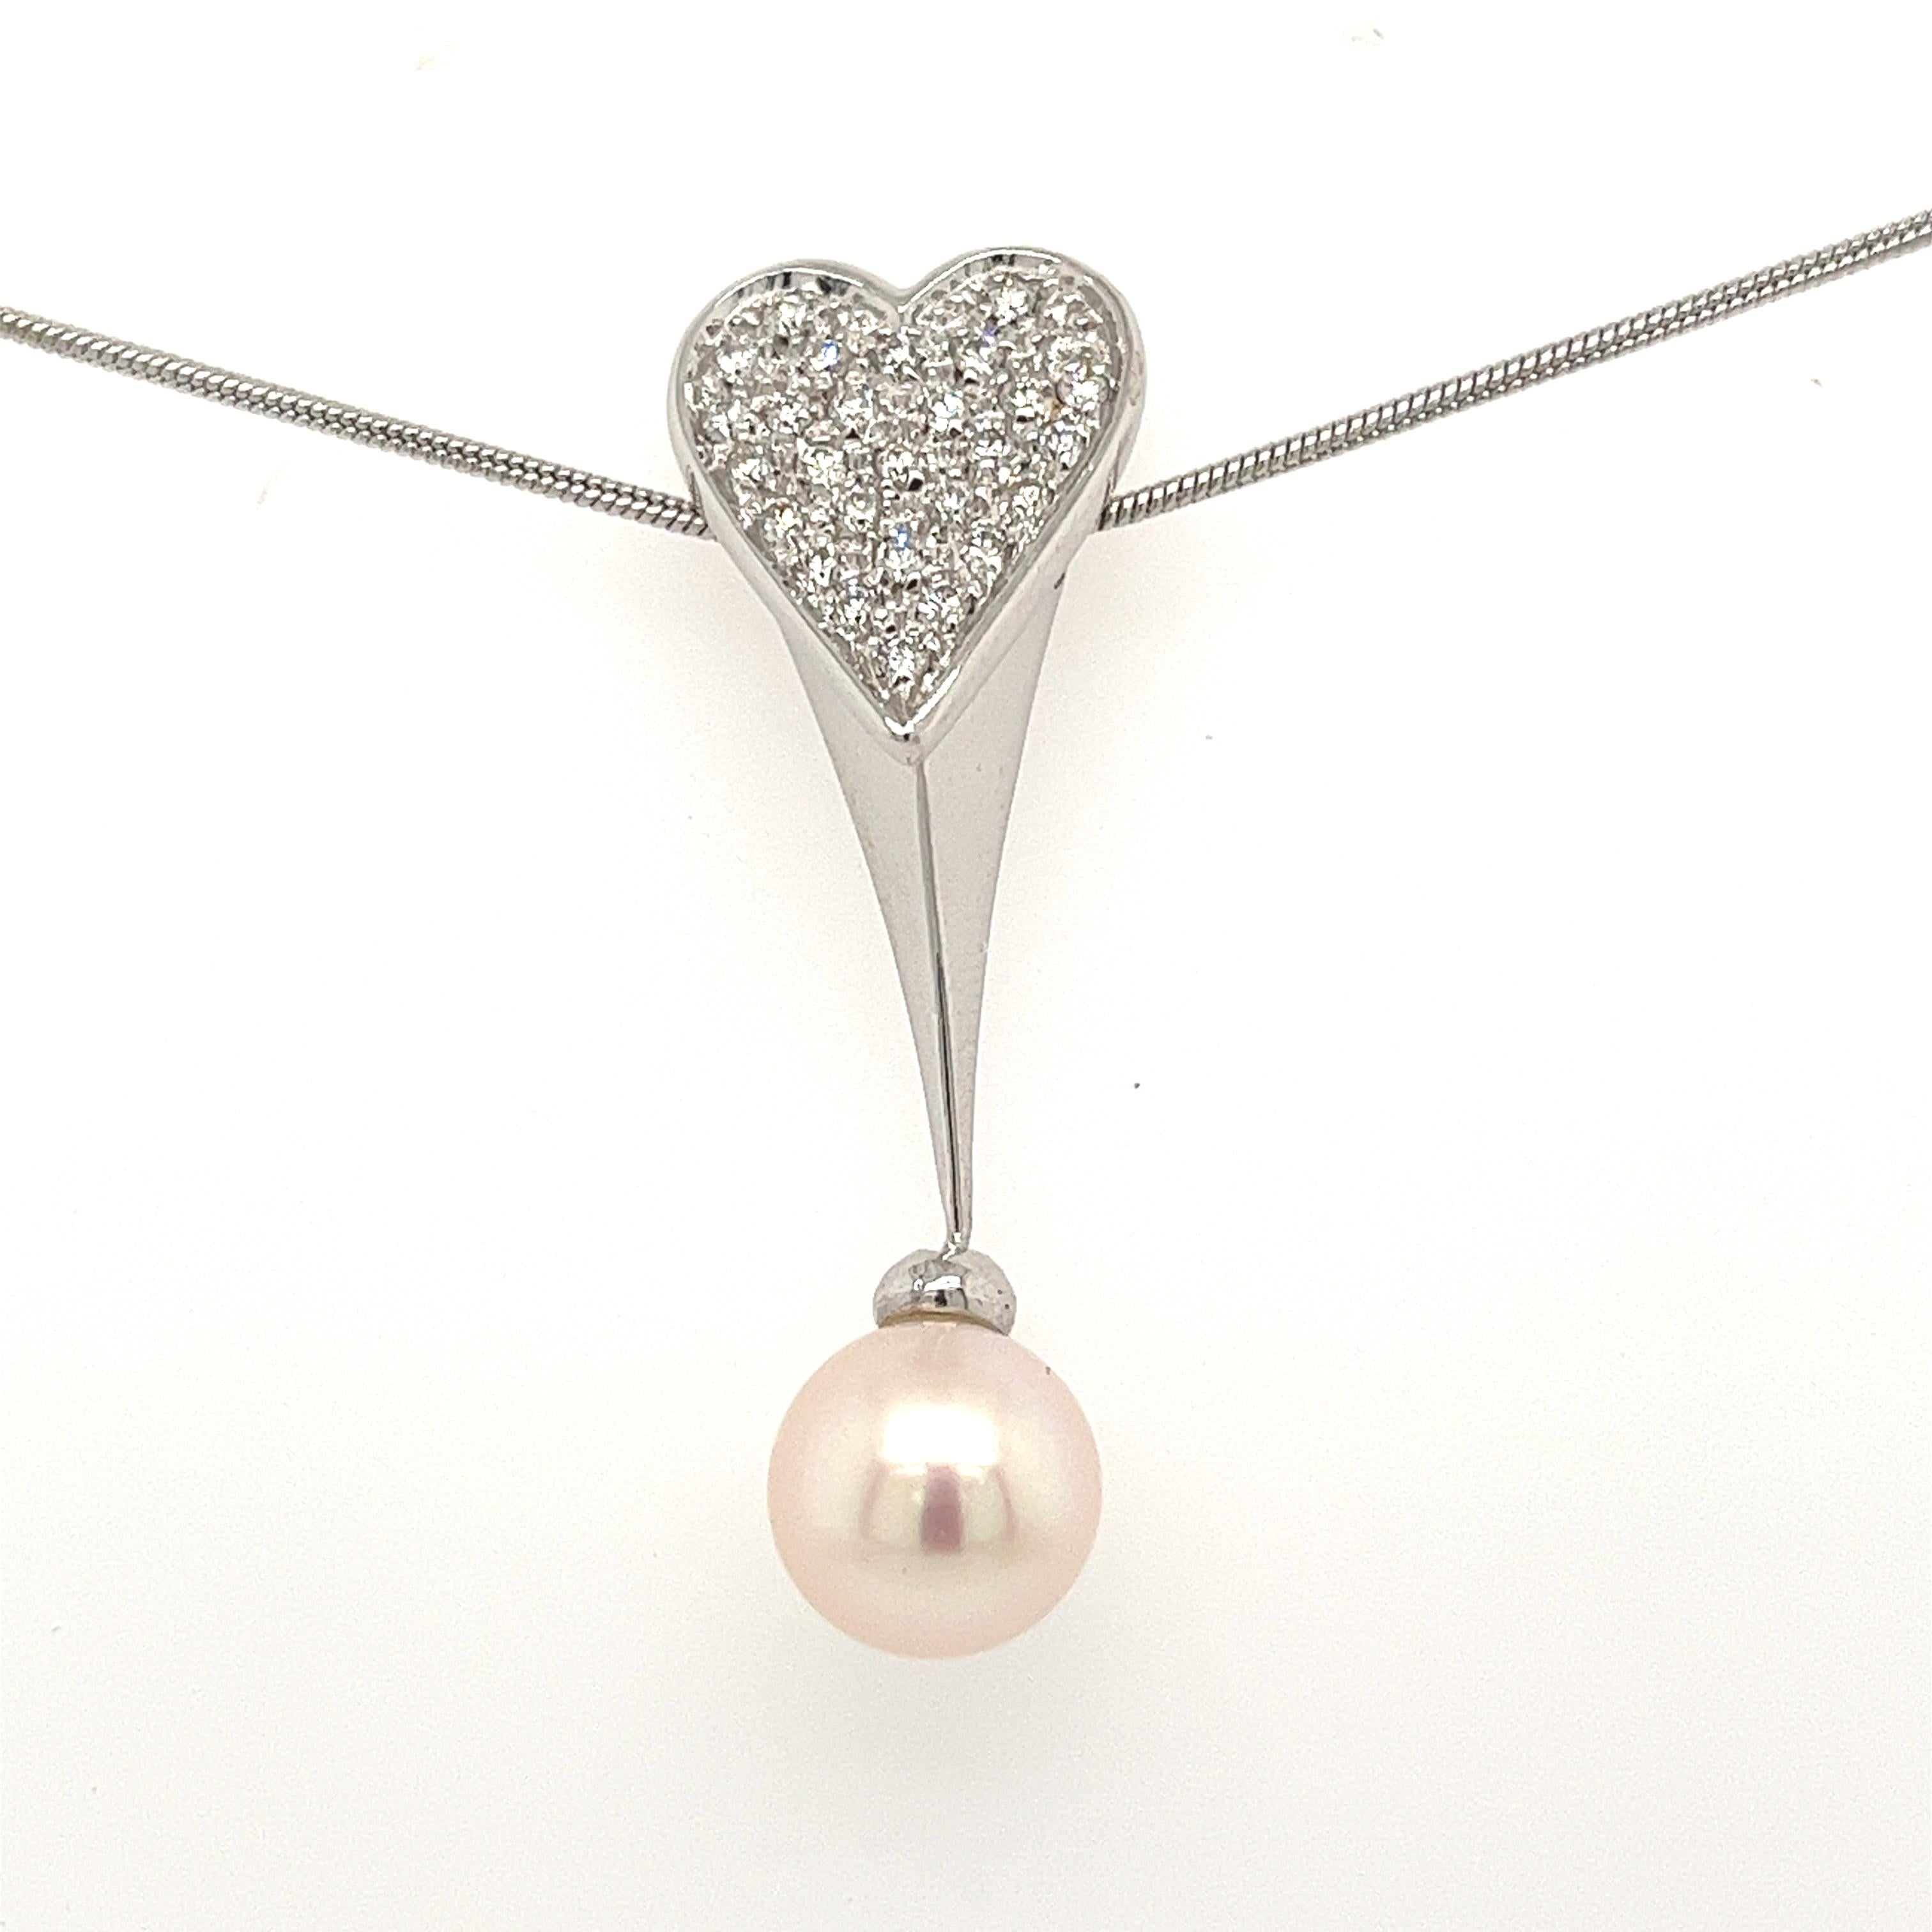 Shop this one of one, natural diamond and pearl drop pendant. Handmade with a themed motif of love and friendship. This drop pendant features 0.70 carats in natural white diamonds and a dainty pink pearl drop. Diamonds are set in an 18k white gold